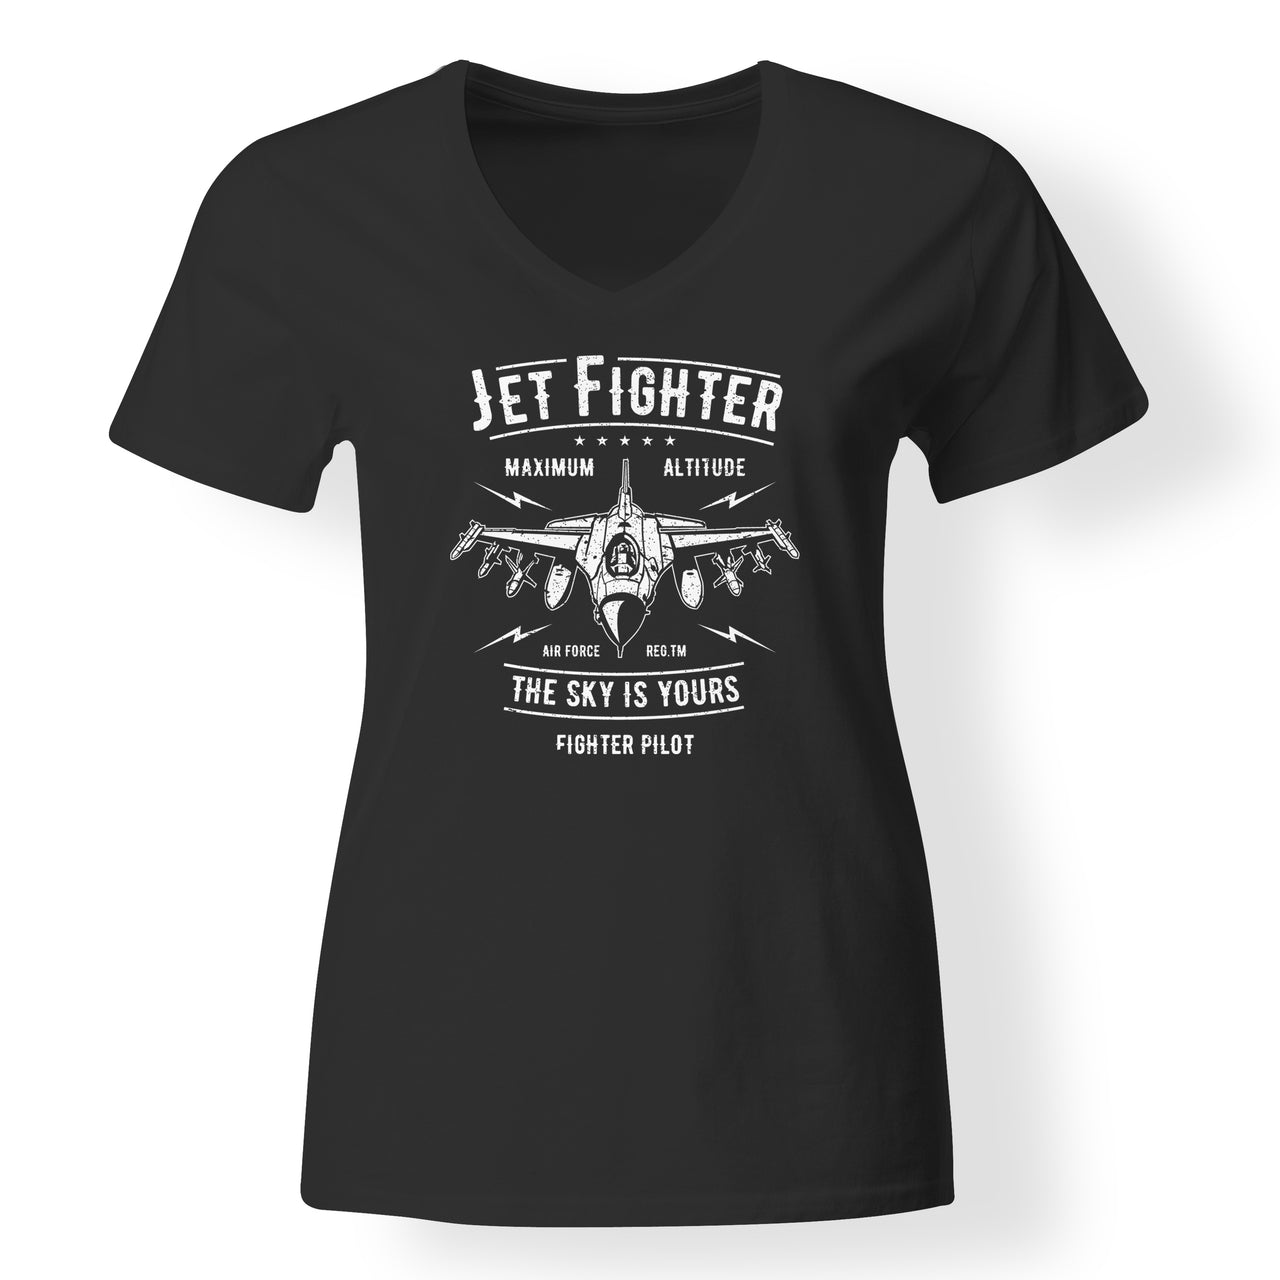 Jet Fighter - The Sky is Yours Designed V-Neck T-Shirts